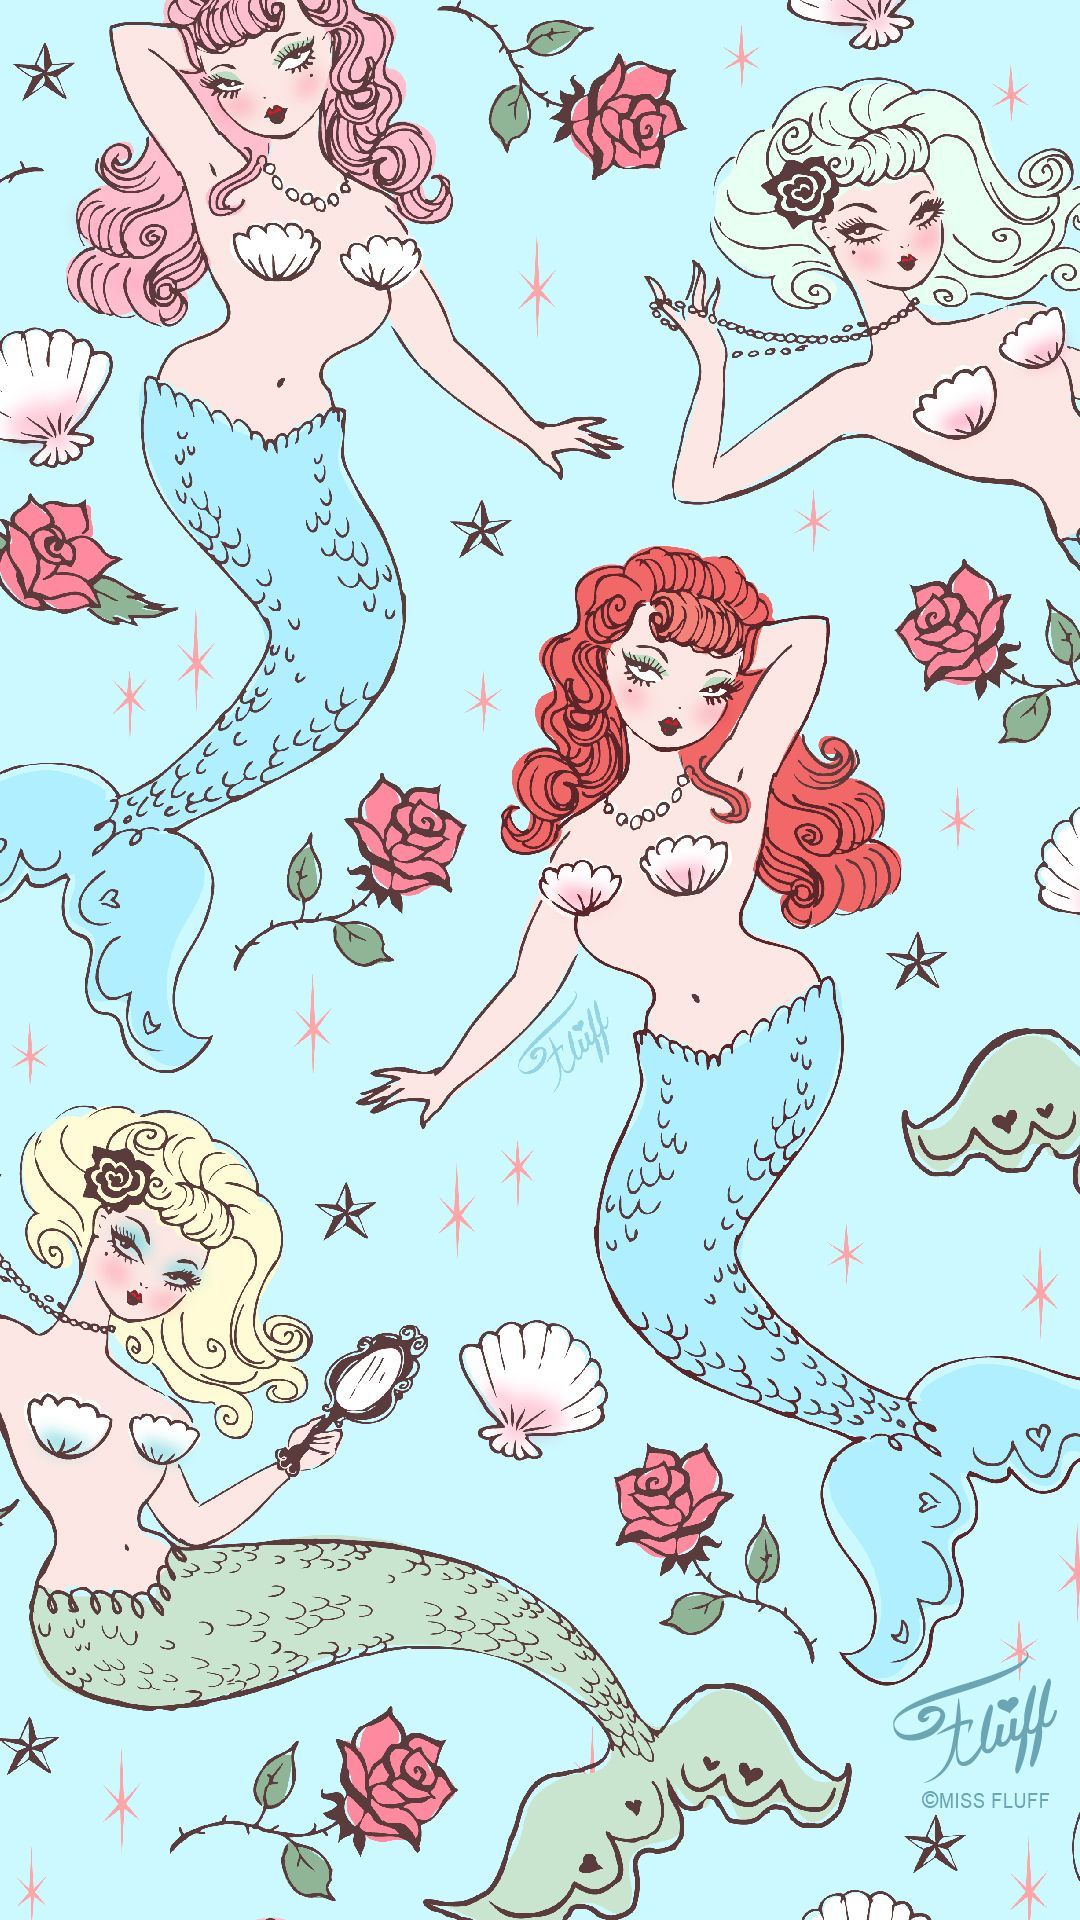 Free Mermaid Wallpaper for your Mobile phone or desktop screen Art of Claudette Barjoud, a.k.a Miss Fluff